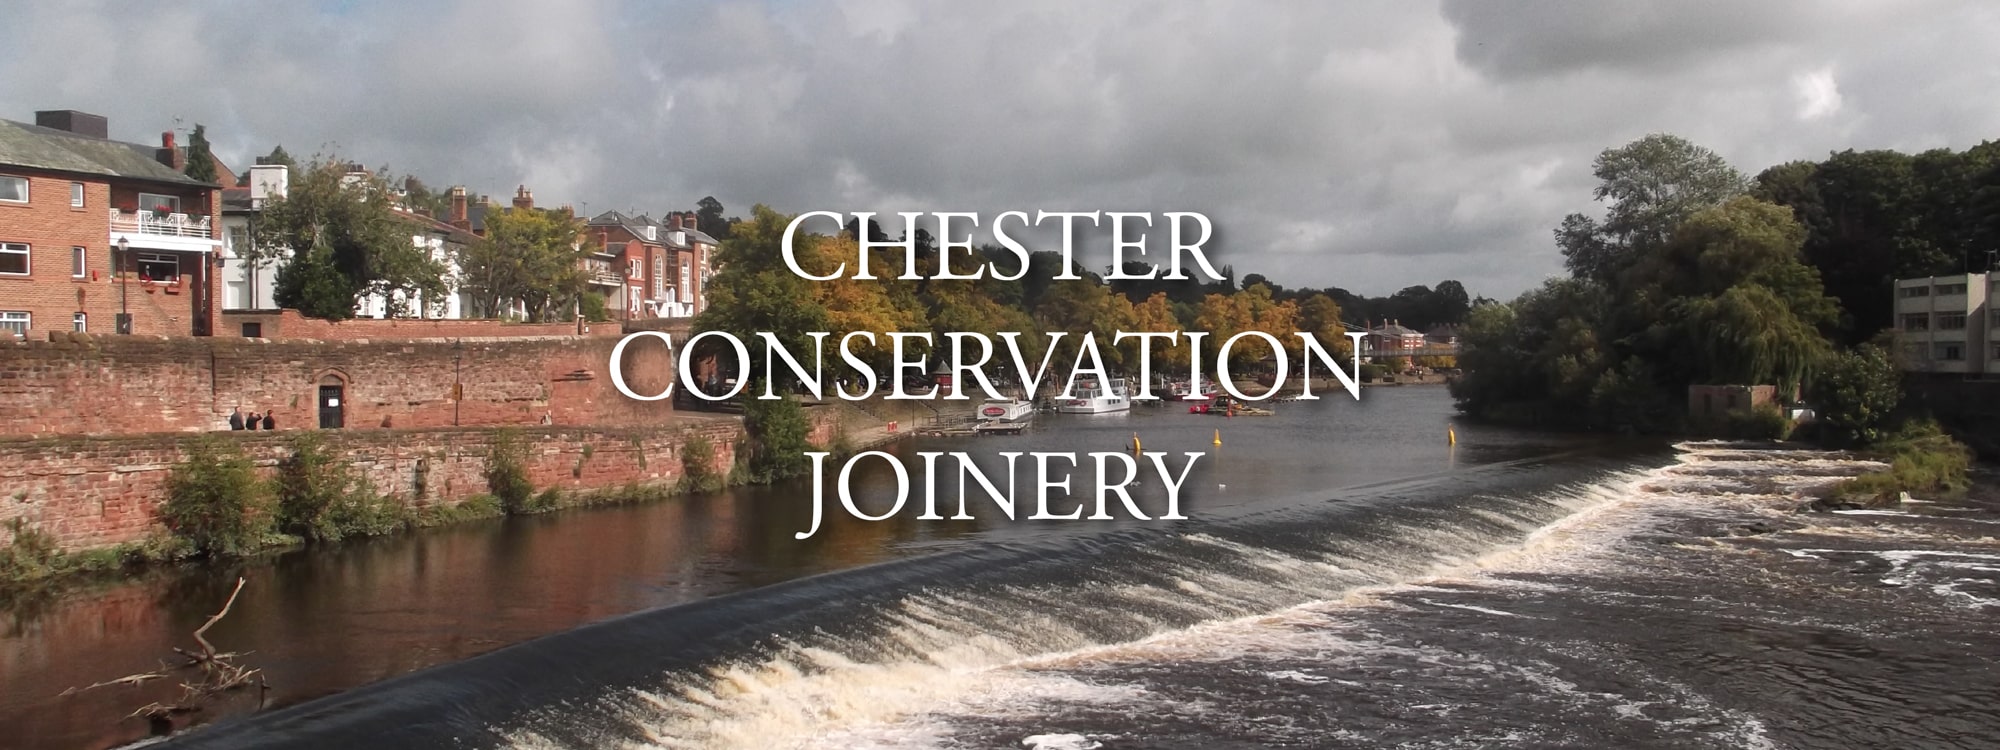 Conservation Joinery Chester